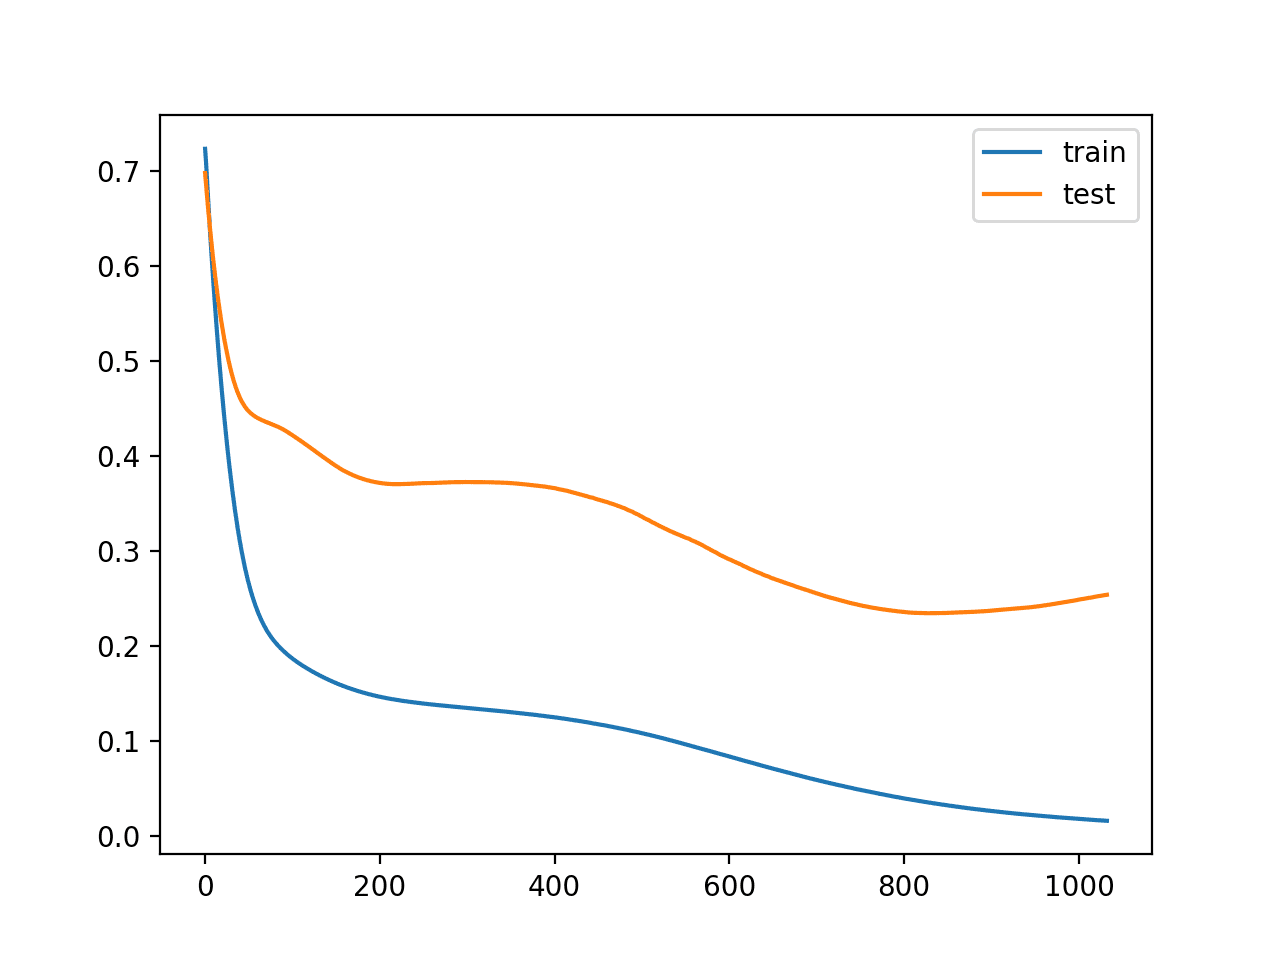 Line Plot of Train and Test Loss During Training With Patient Early Stopping